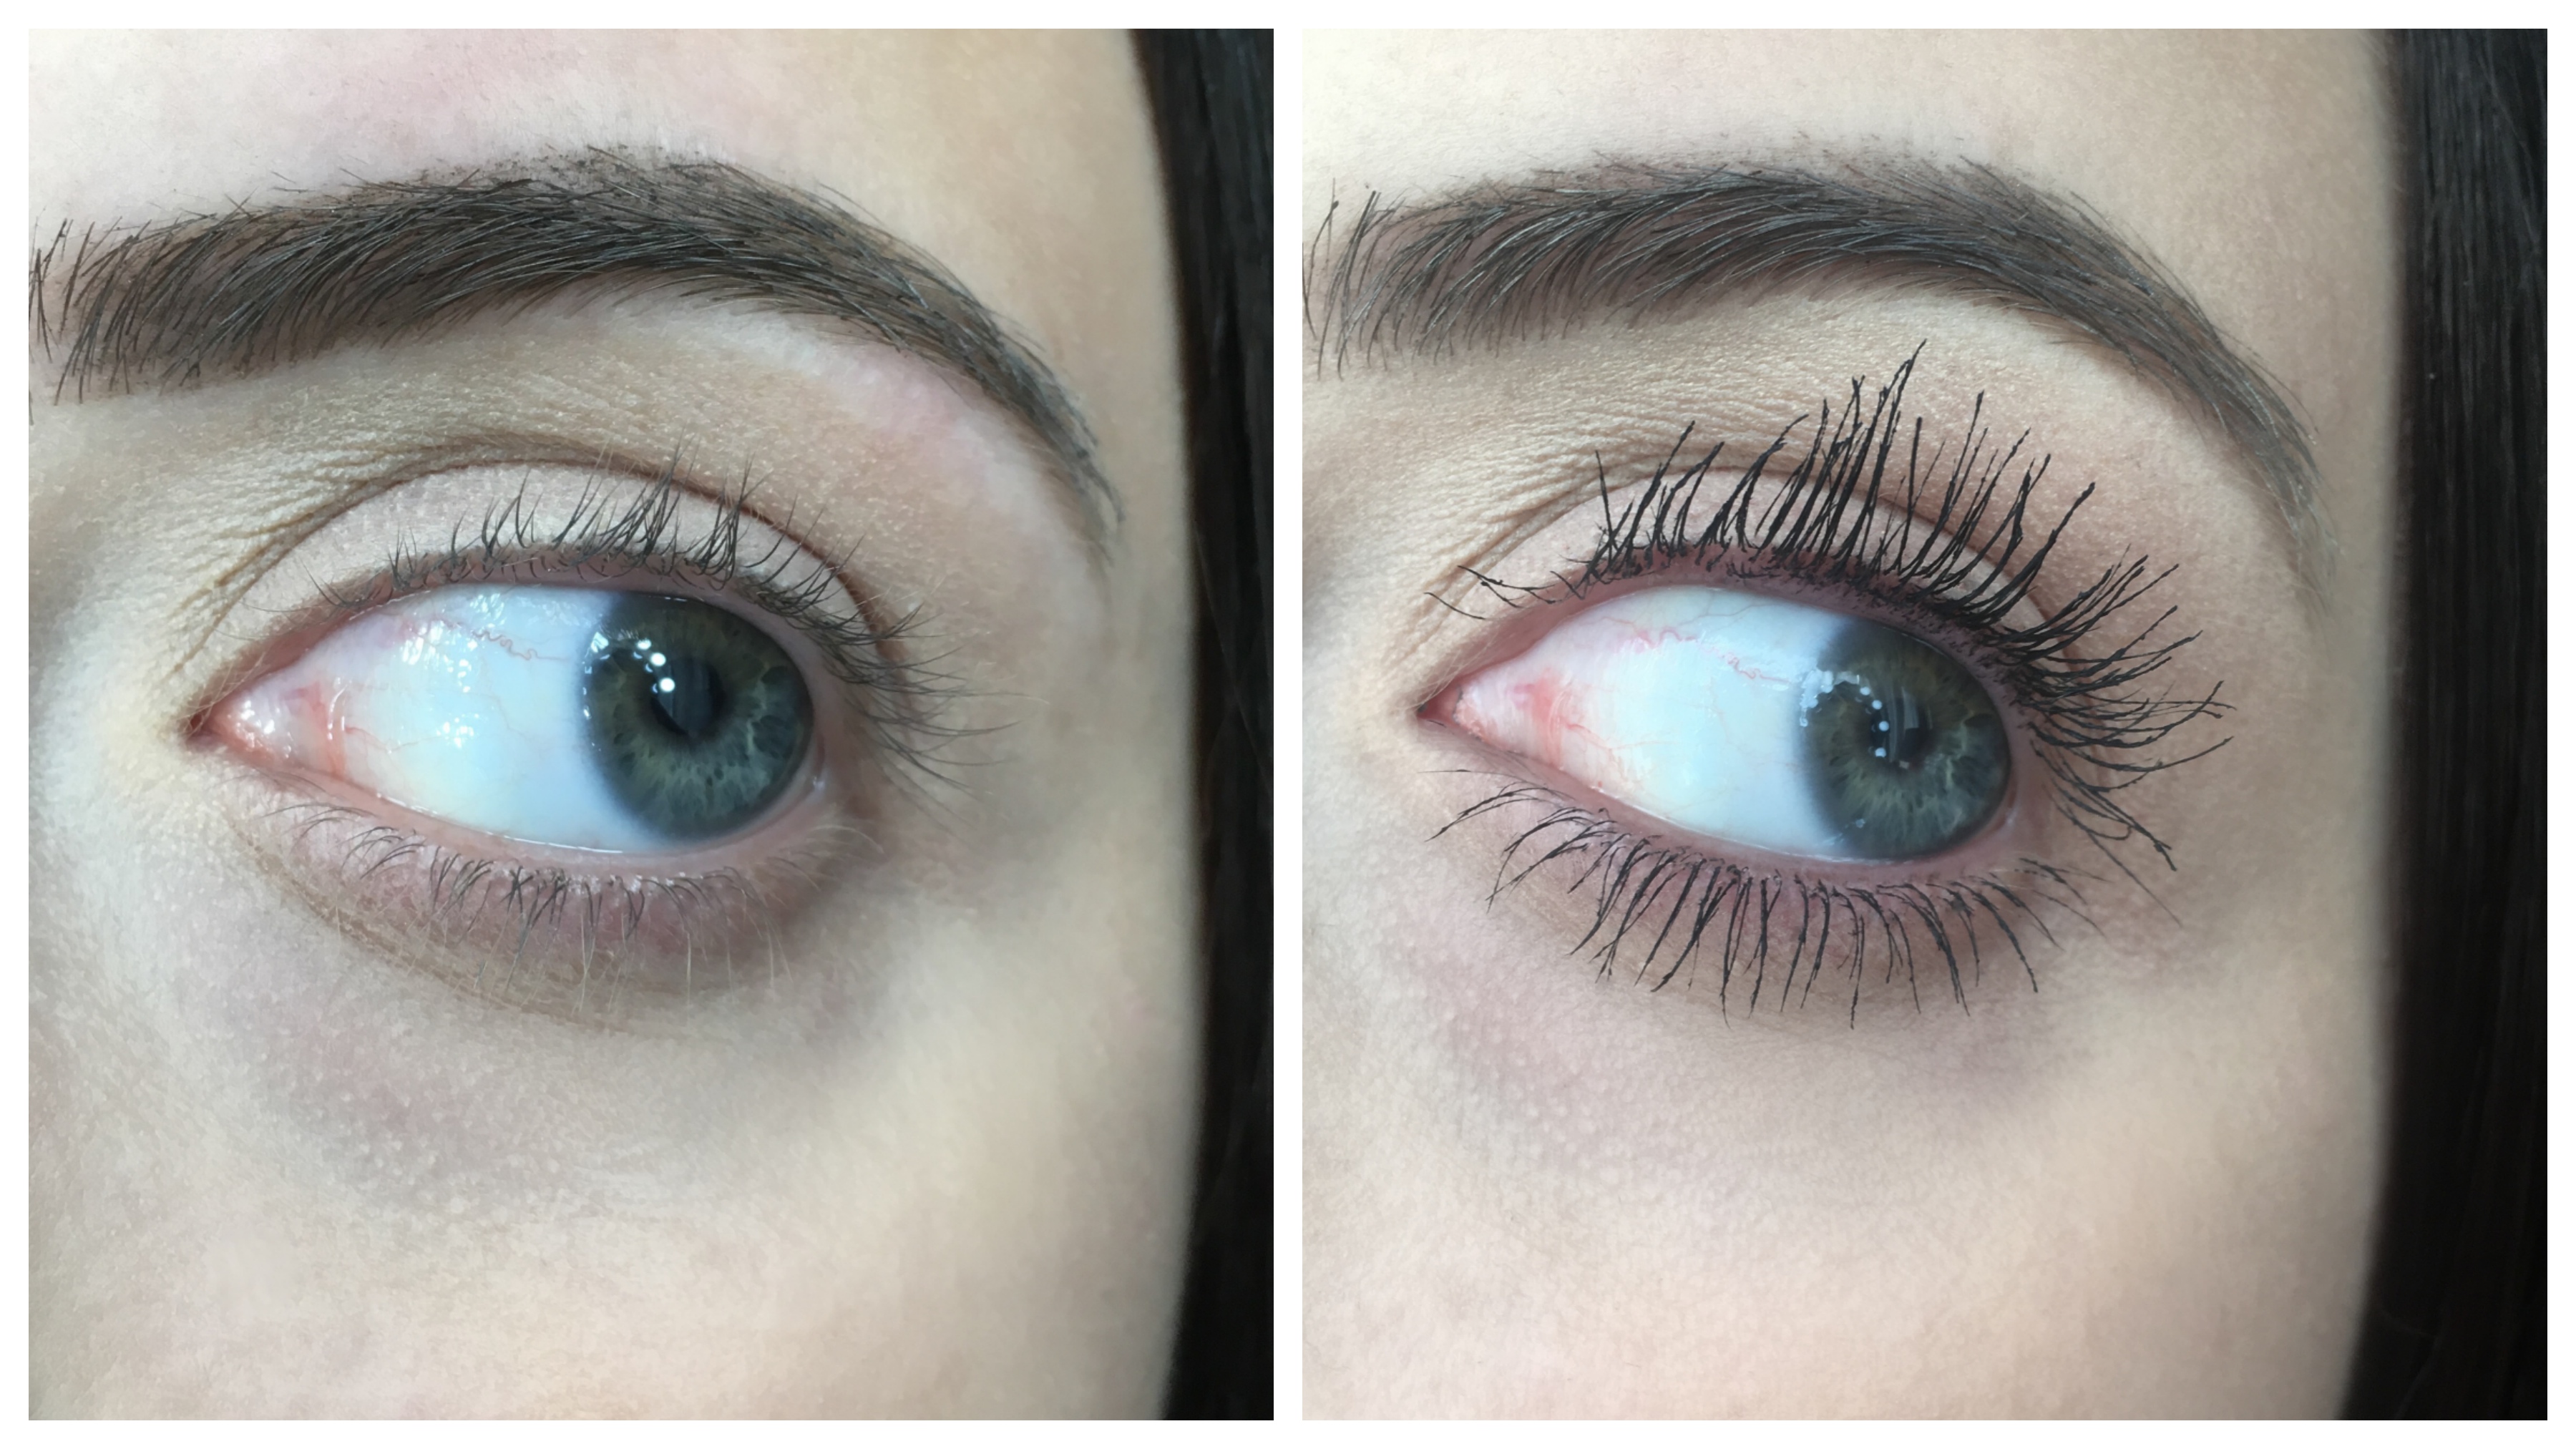 YSL The Curler Mascara Review - Before & After Photos